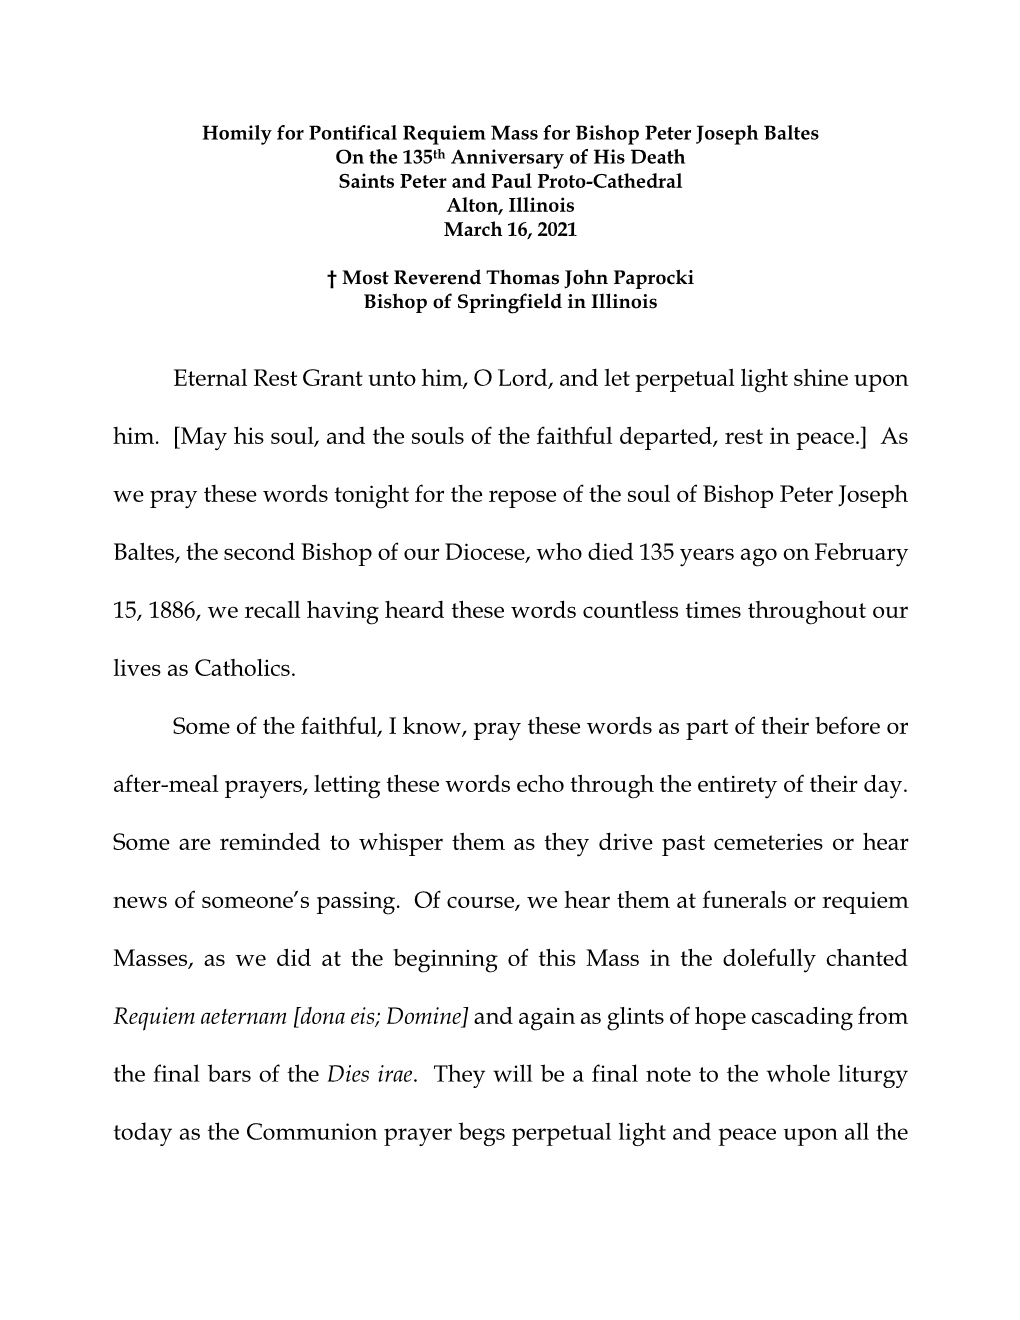 Homily for Pontifical Requiem Mass for Bishop Peter Joseph Baltes On